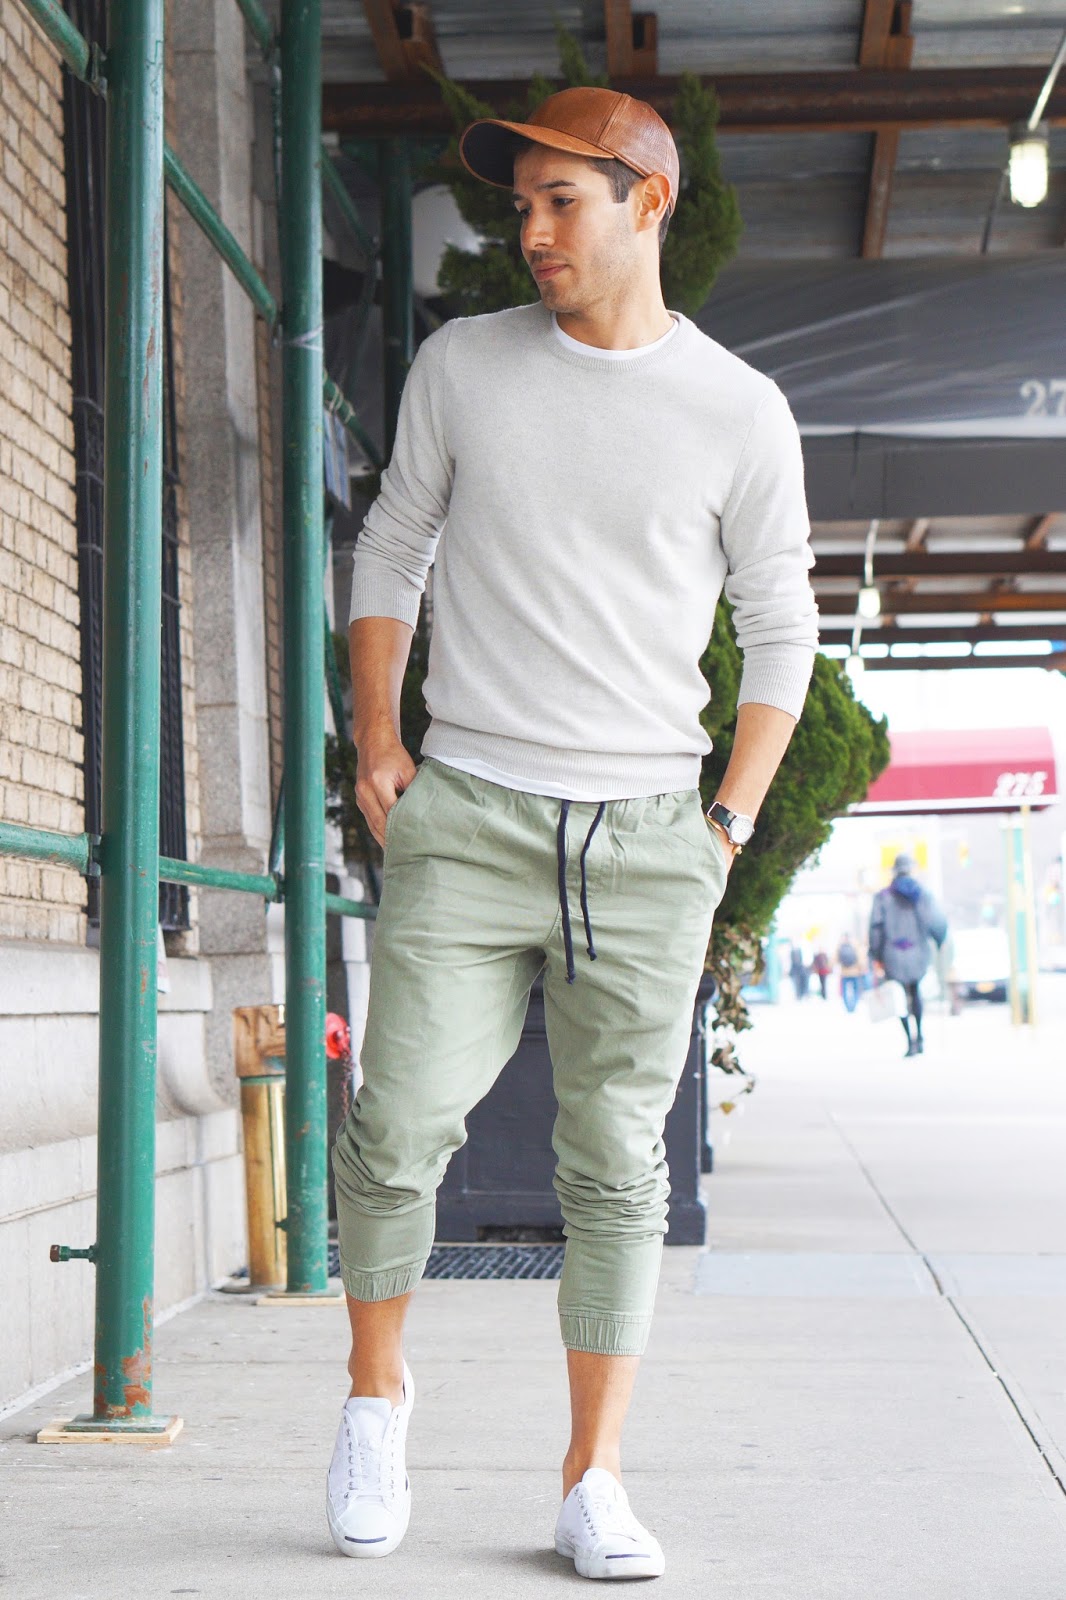 Jogger Wear - TREND STYLED • Style, Grooming, Design, and Travel ...